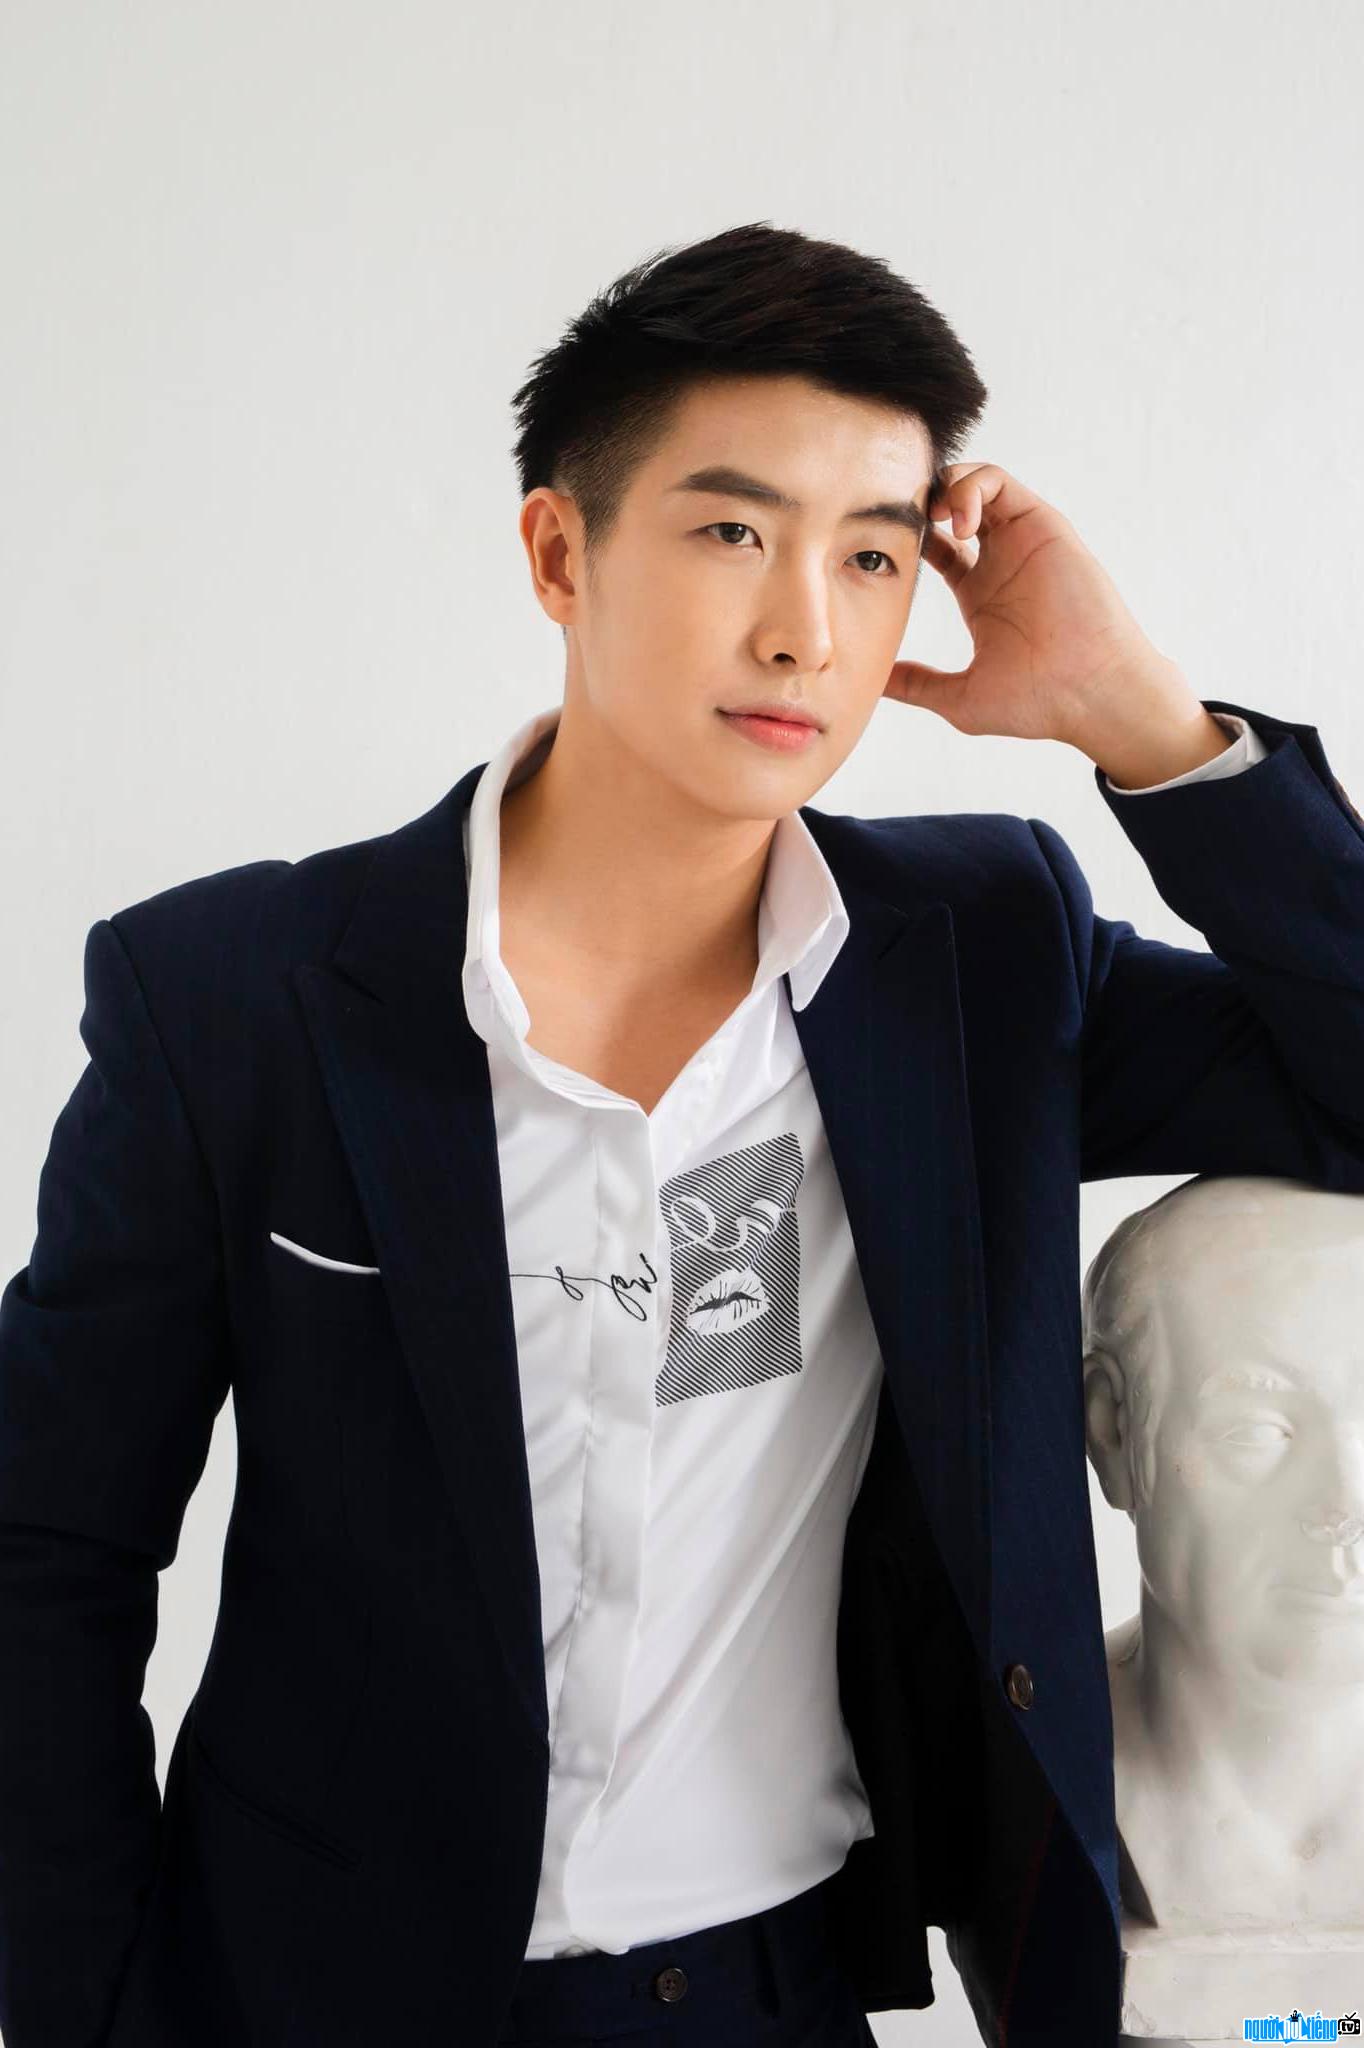  actor Vu Phuong is handsome and elegant